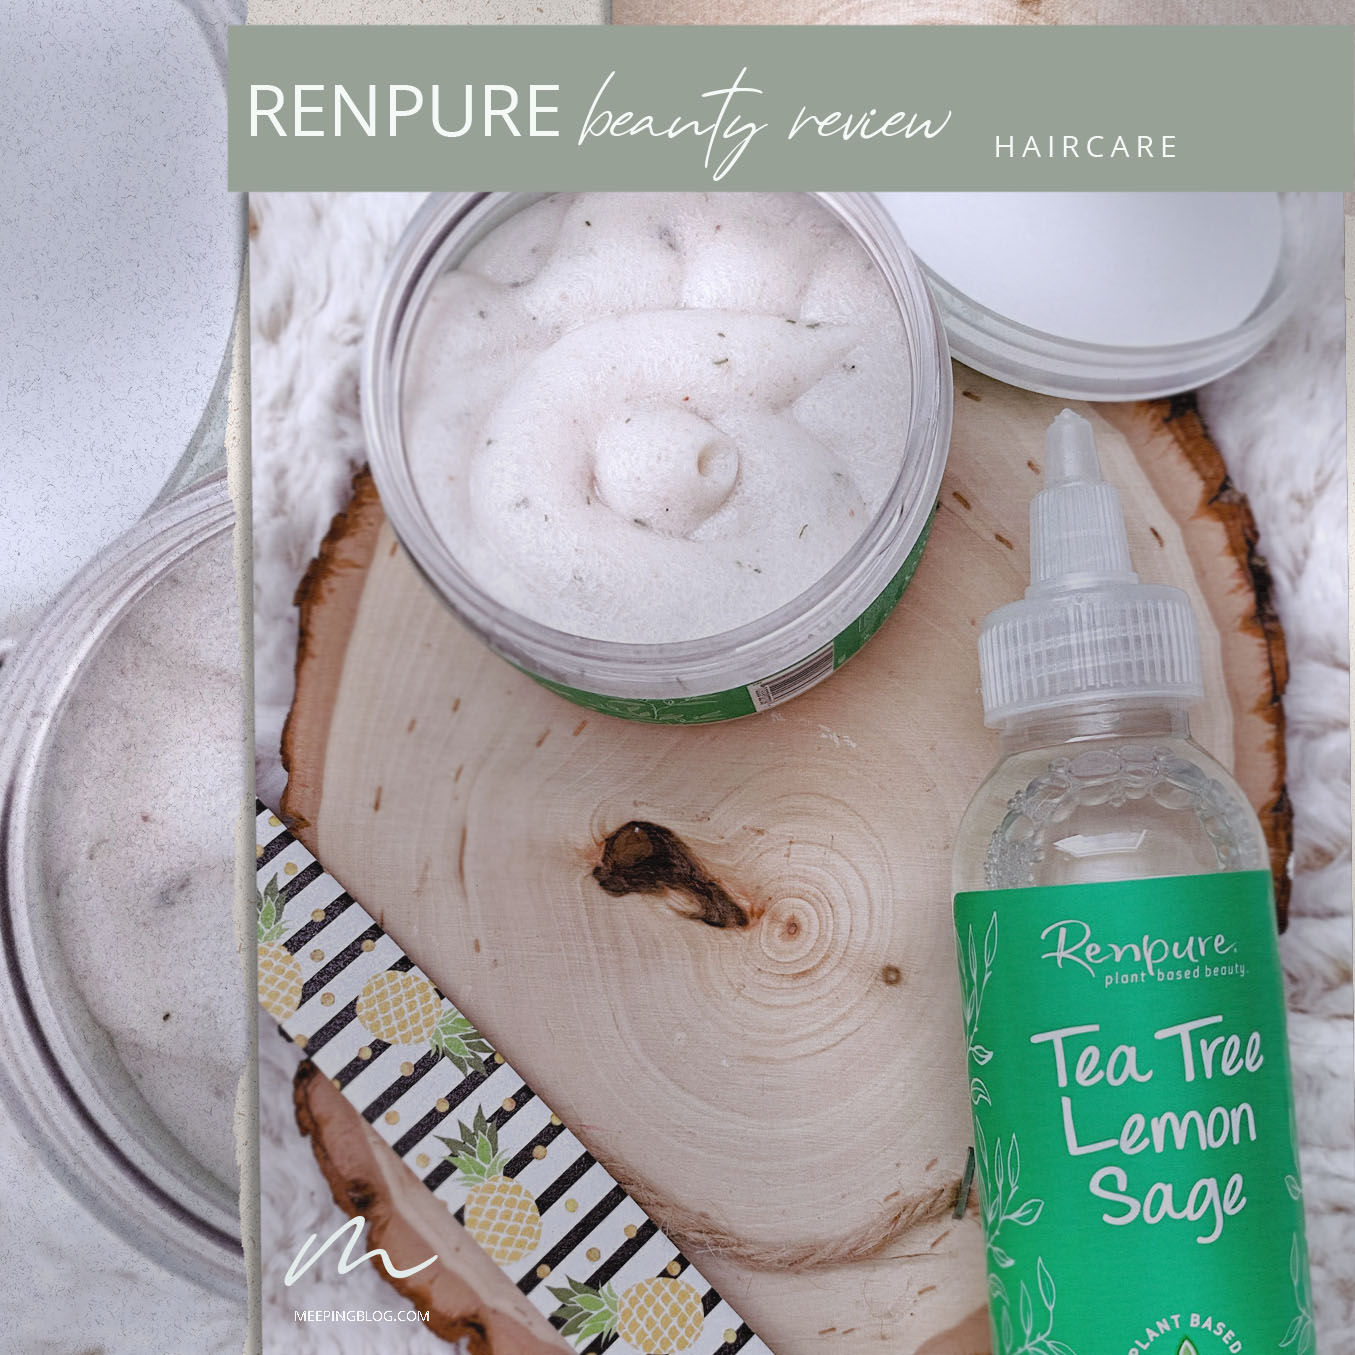 Renpure Haircare Products | in Beauty